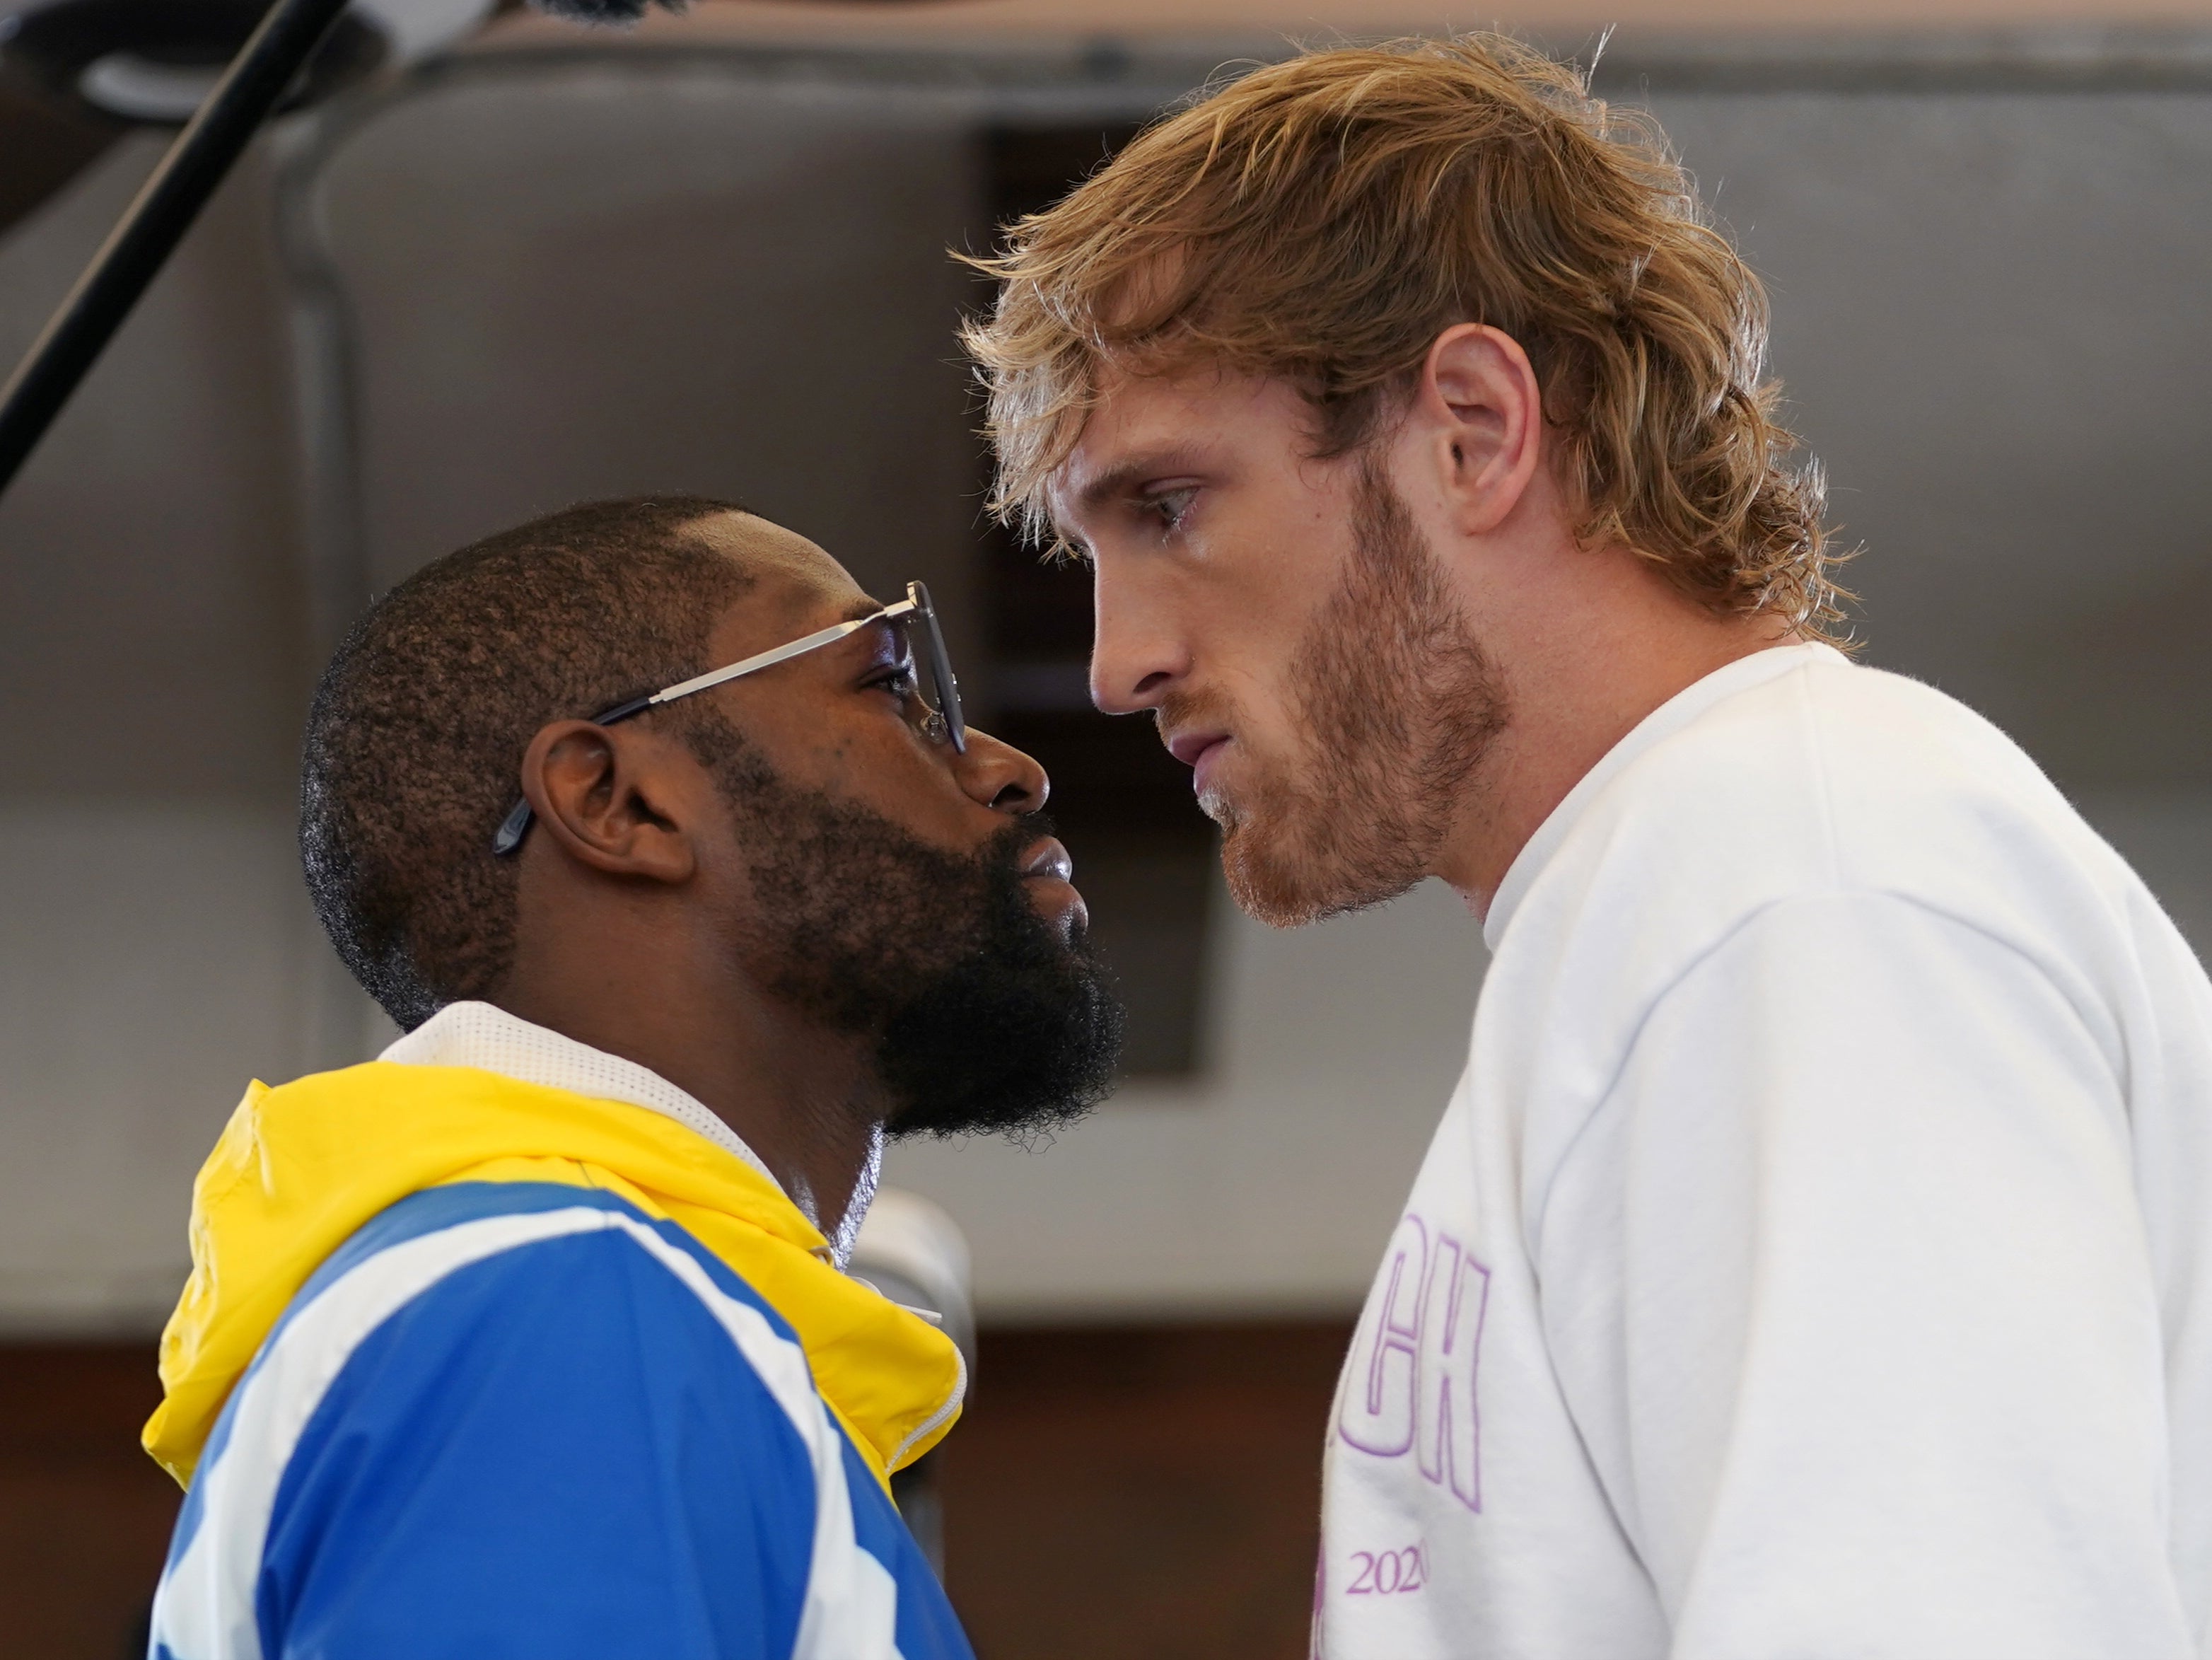 Mayweather vs Logan Paul free live stream links to watch boxing fight spread online despite warnings The Independent